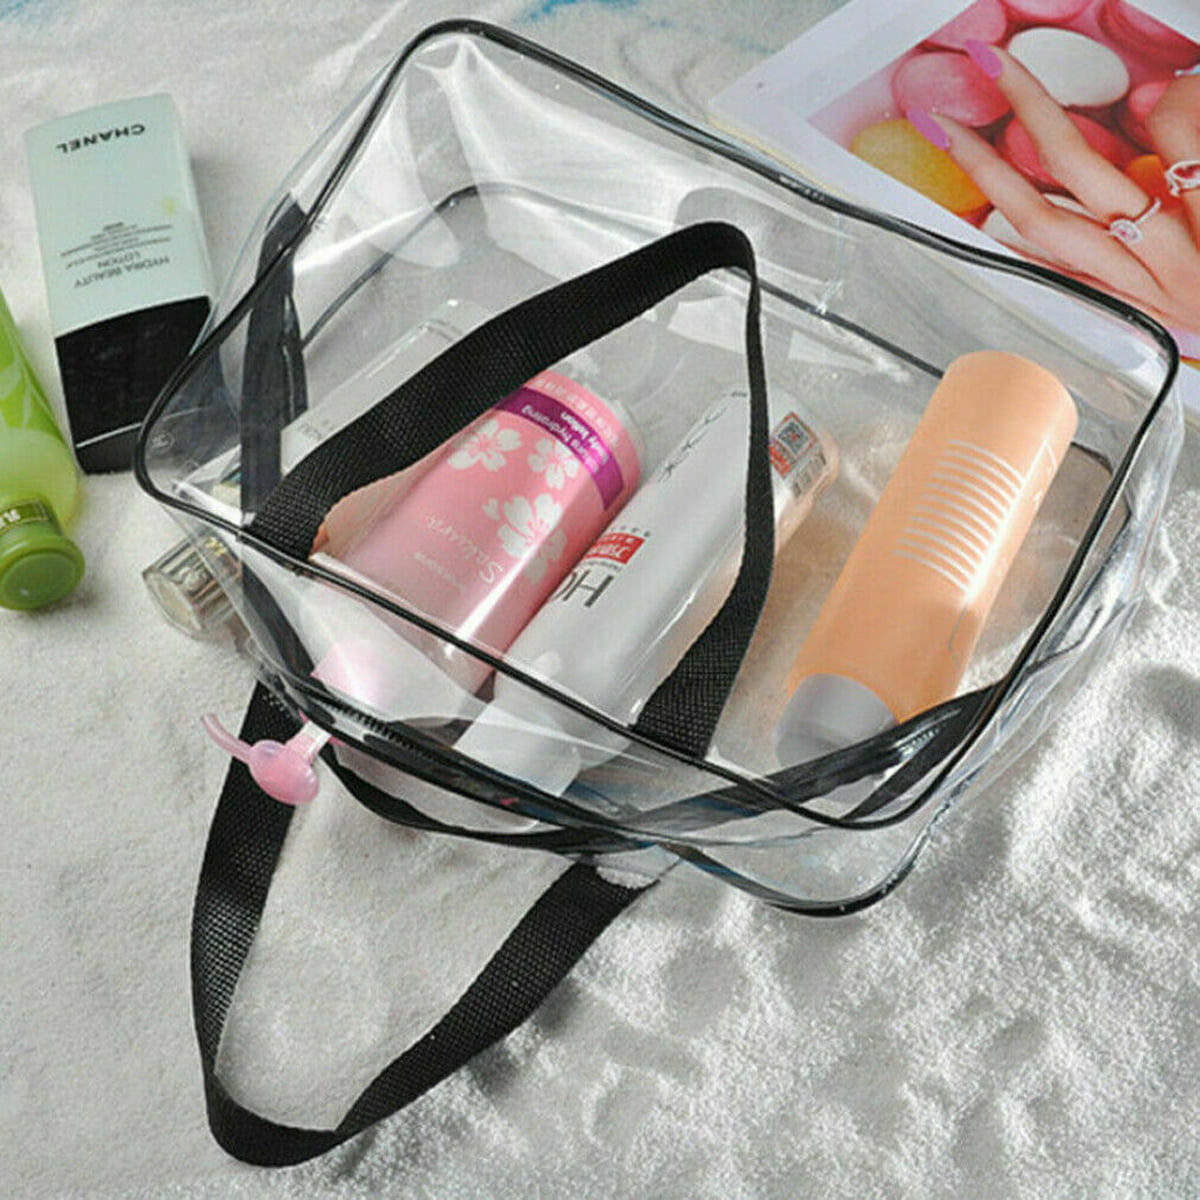 Youweixiong PVC Transparent Travel Toiletry Bag Makeup Bag with Handle  Strap Large Capacity Cosmetic Pouch for Women Men Girl Boy 